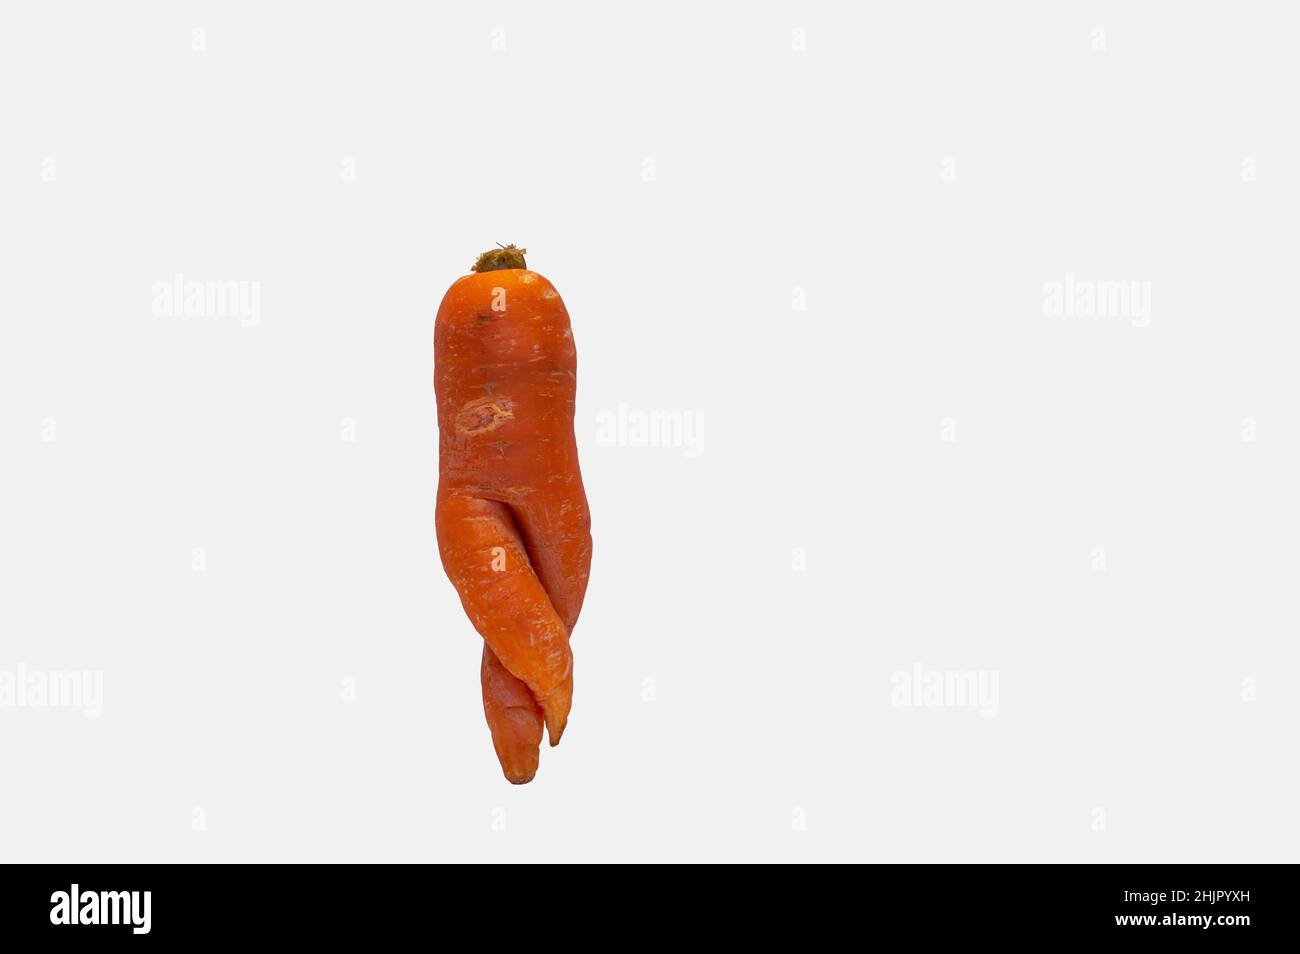 Deformed carrot resembling human body shape isolated on white Stock Photo